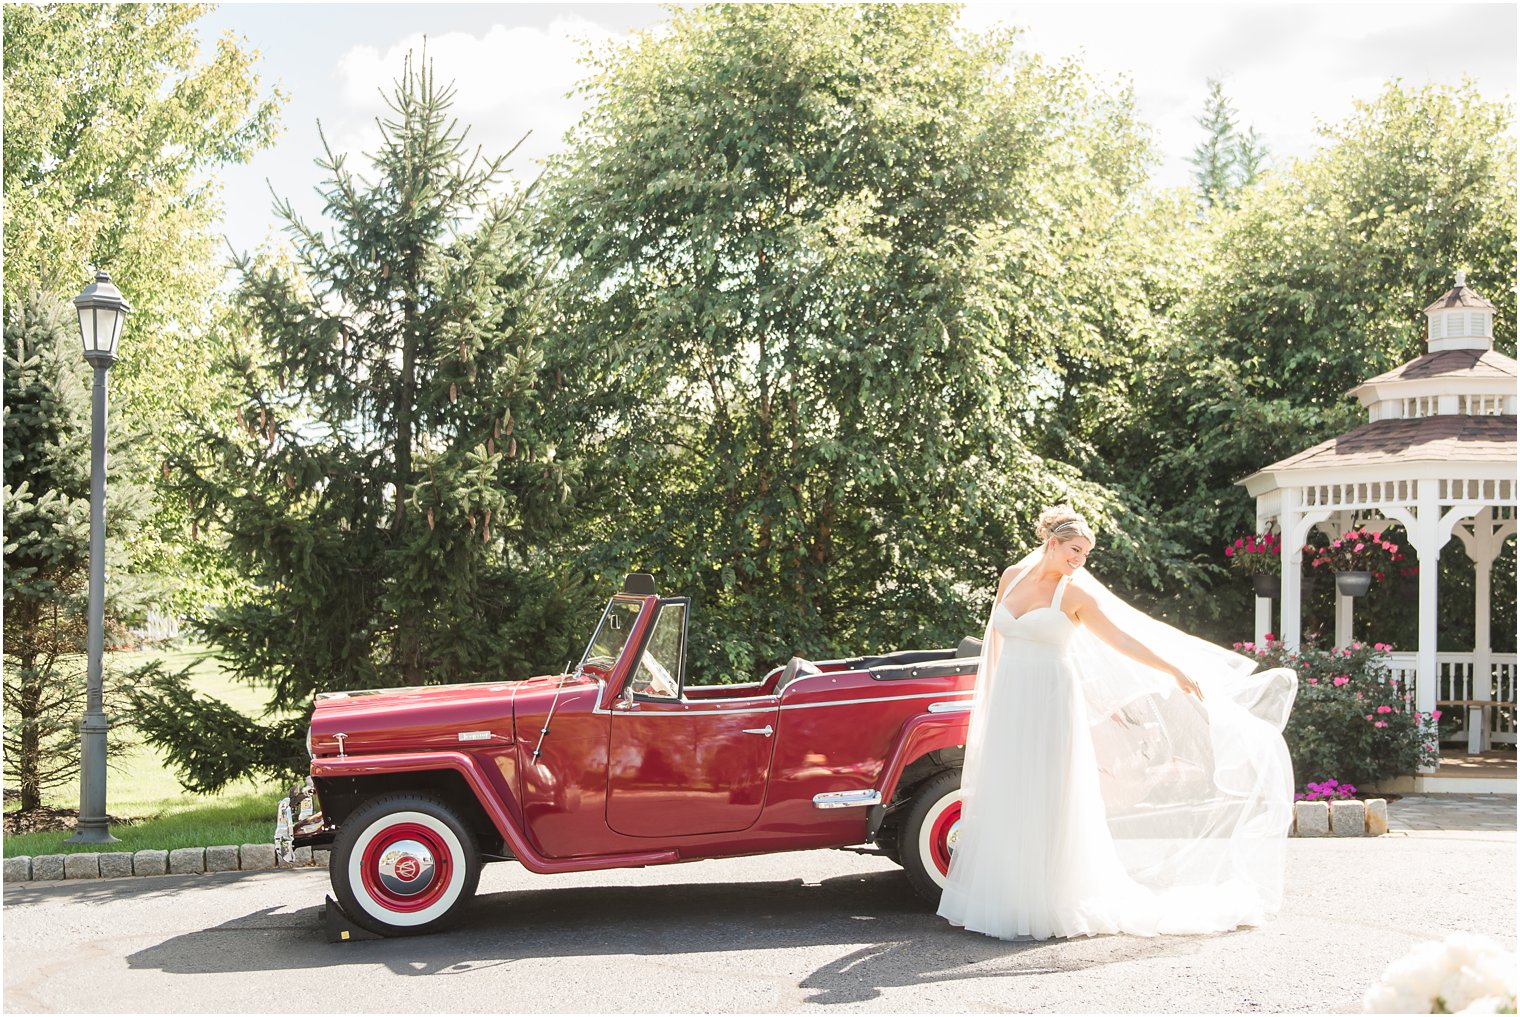 Romantic bridal portrait with veil in front of red antique Jeepster